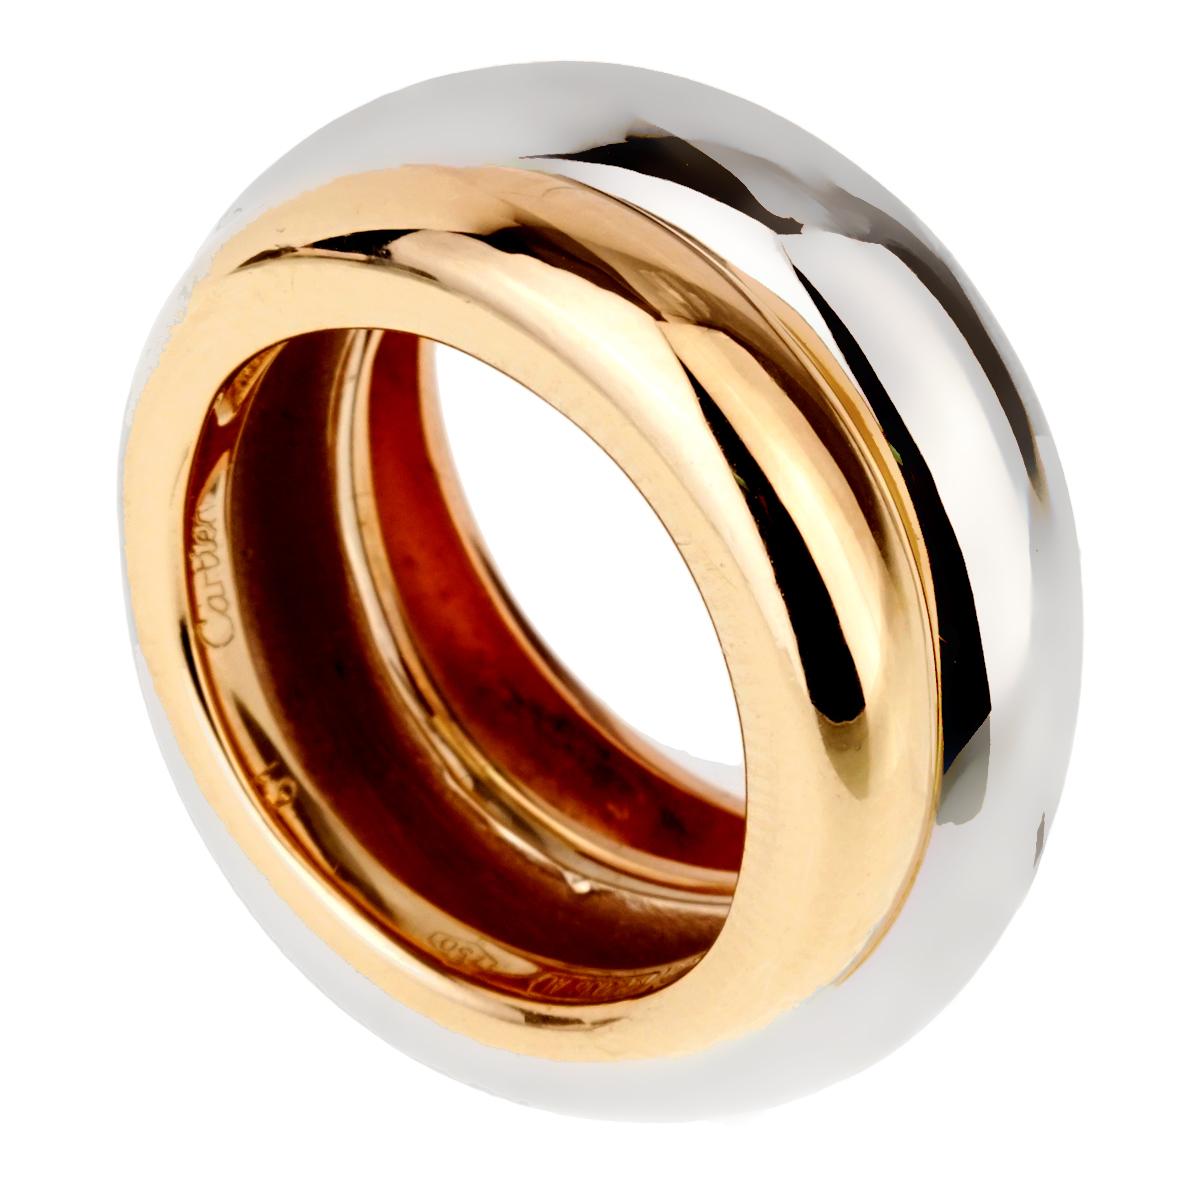 A stunning Cartier Trinity ring featuring tri color 18k yellow rose and white gold seamlessly paired together. Size 5 1/2

Sku: 1059